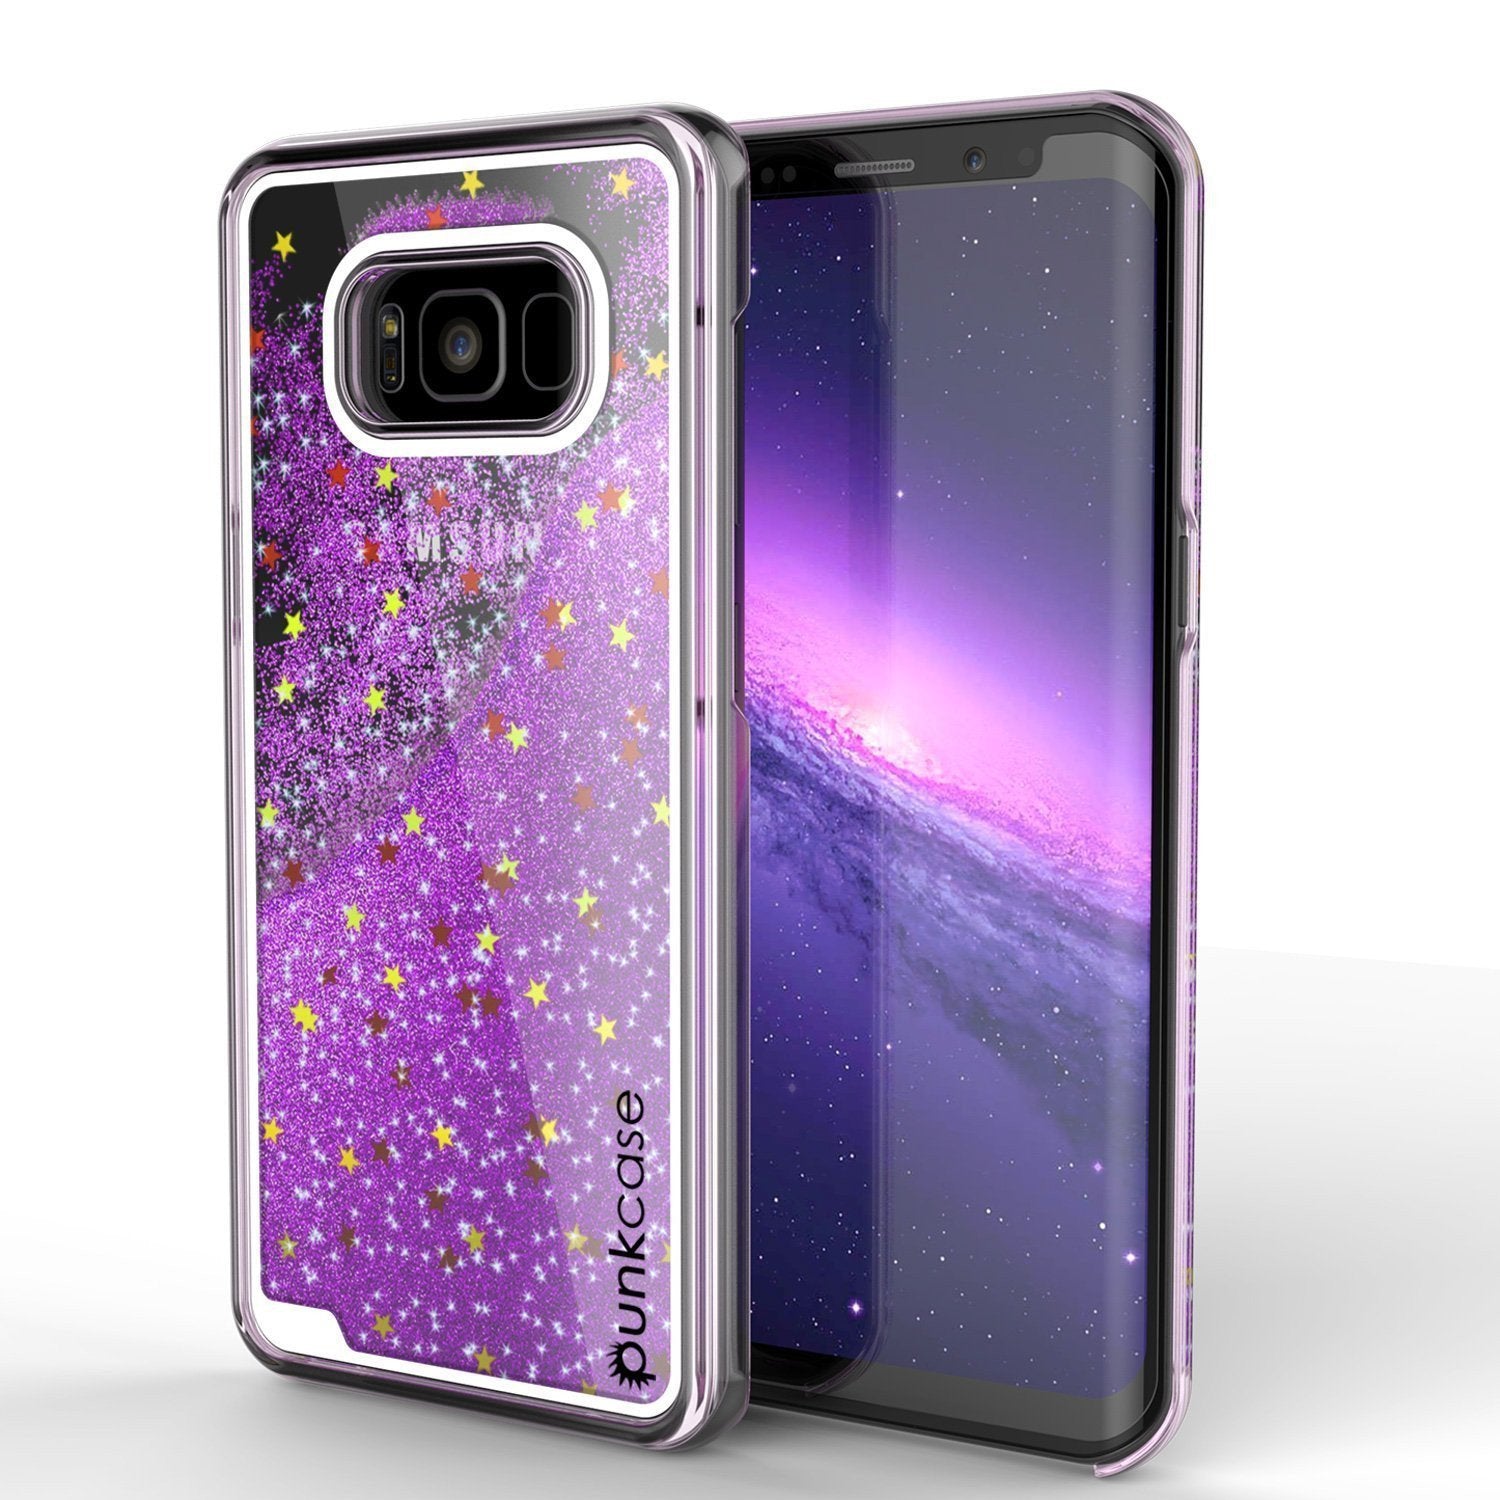 S8 Plus Case, Punkcase [Liquid Series] Protective Dual Layer Floating Glitter Cover with lots of Bling & Sparkle + PunkShield Screen Protector for Samsungs Galaxy S8+ [Purple]